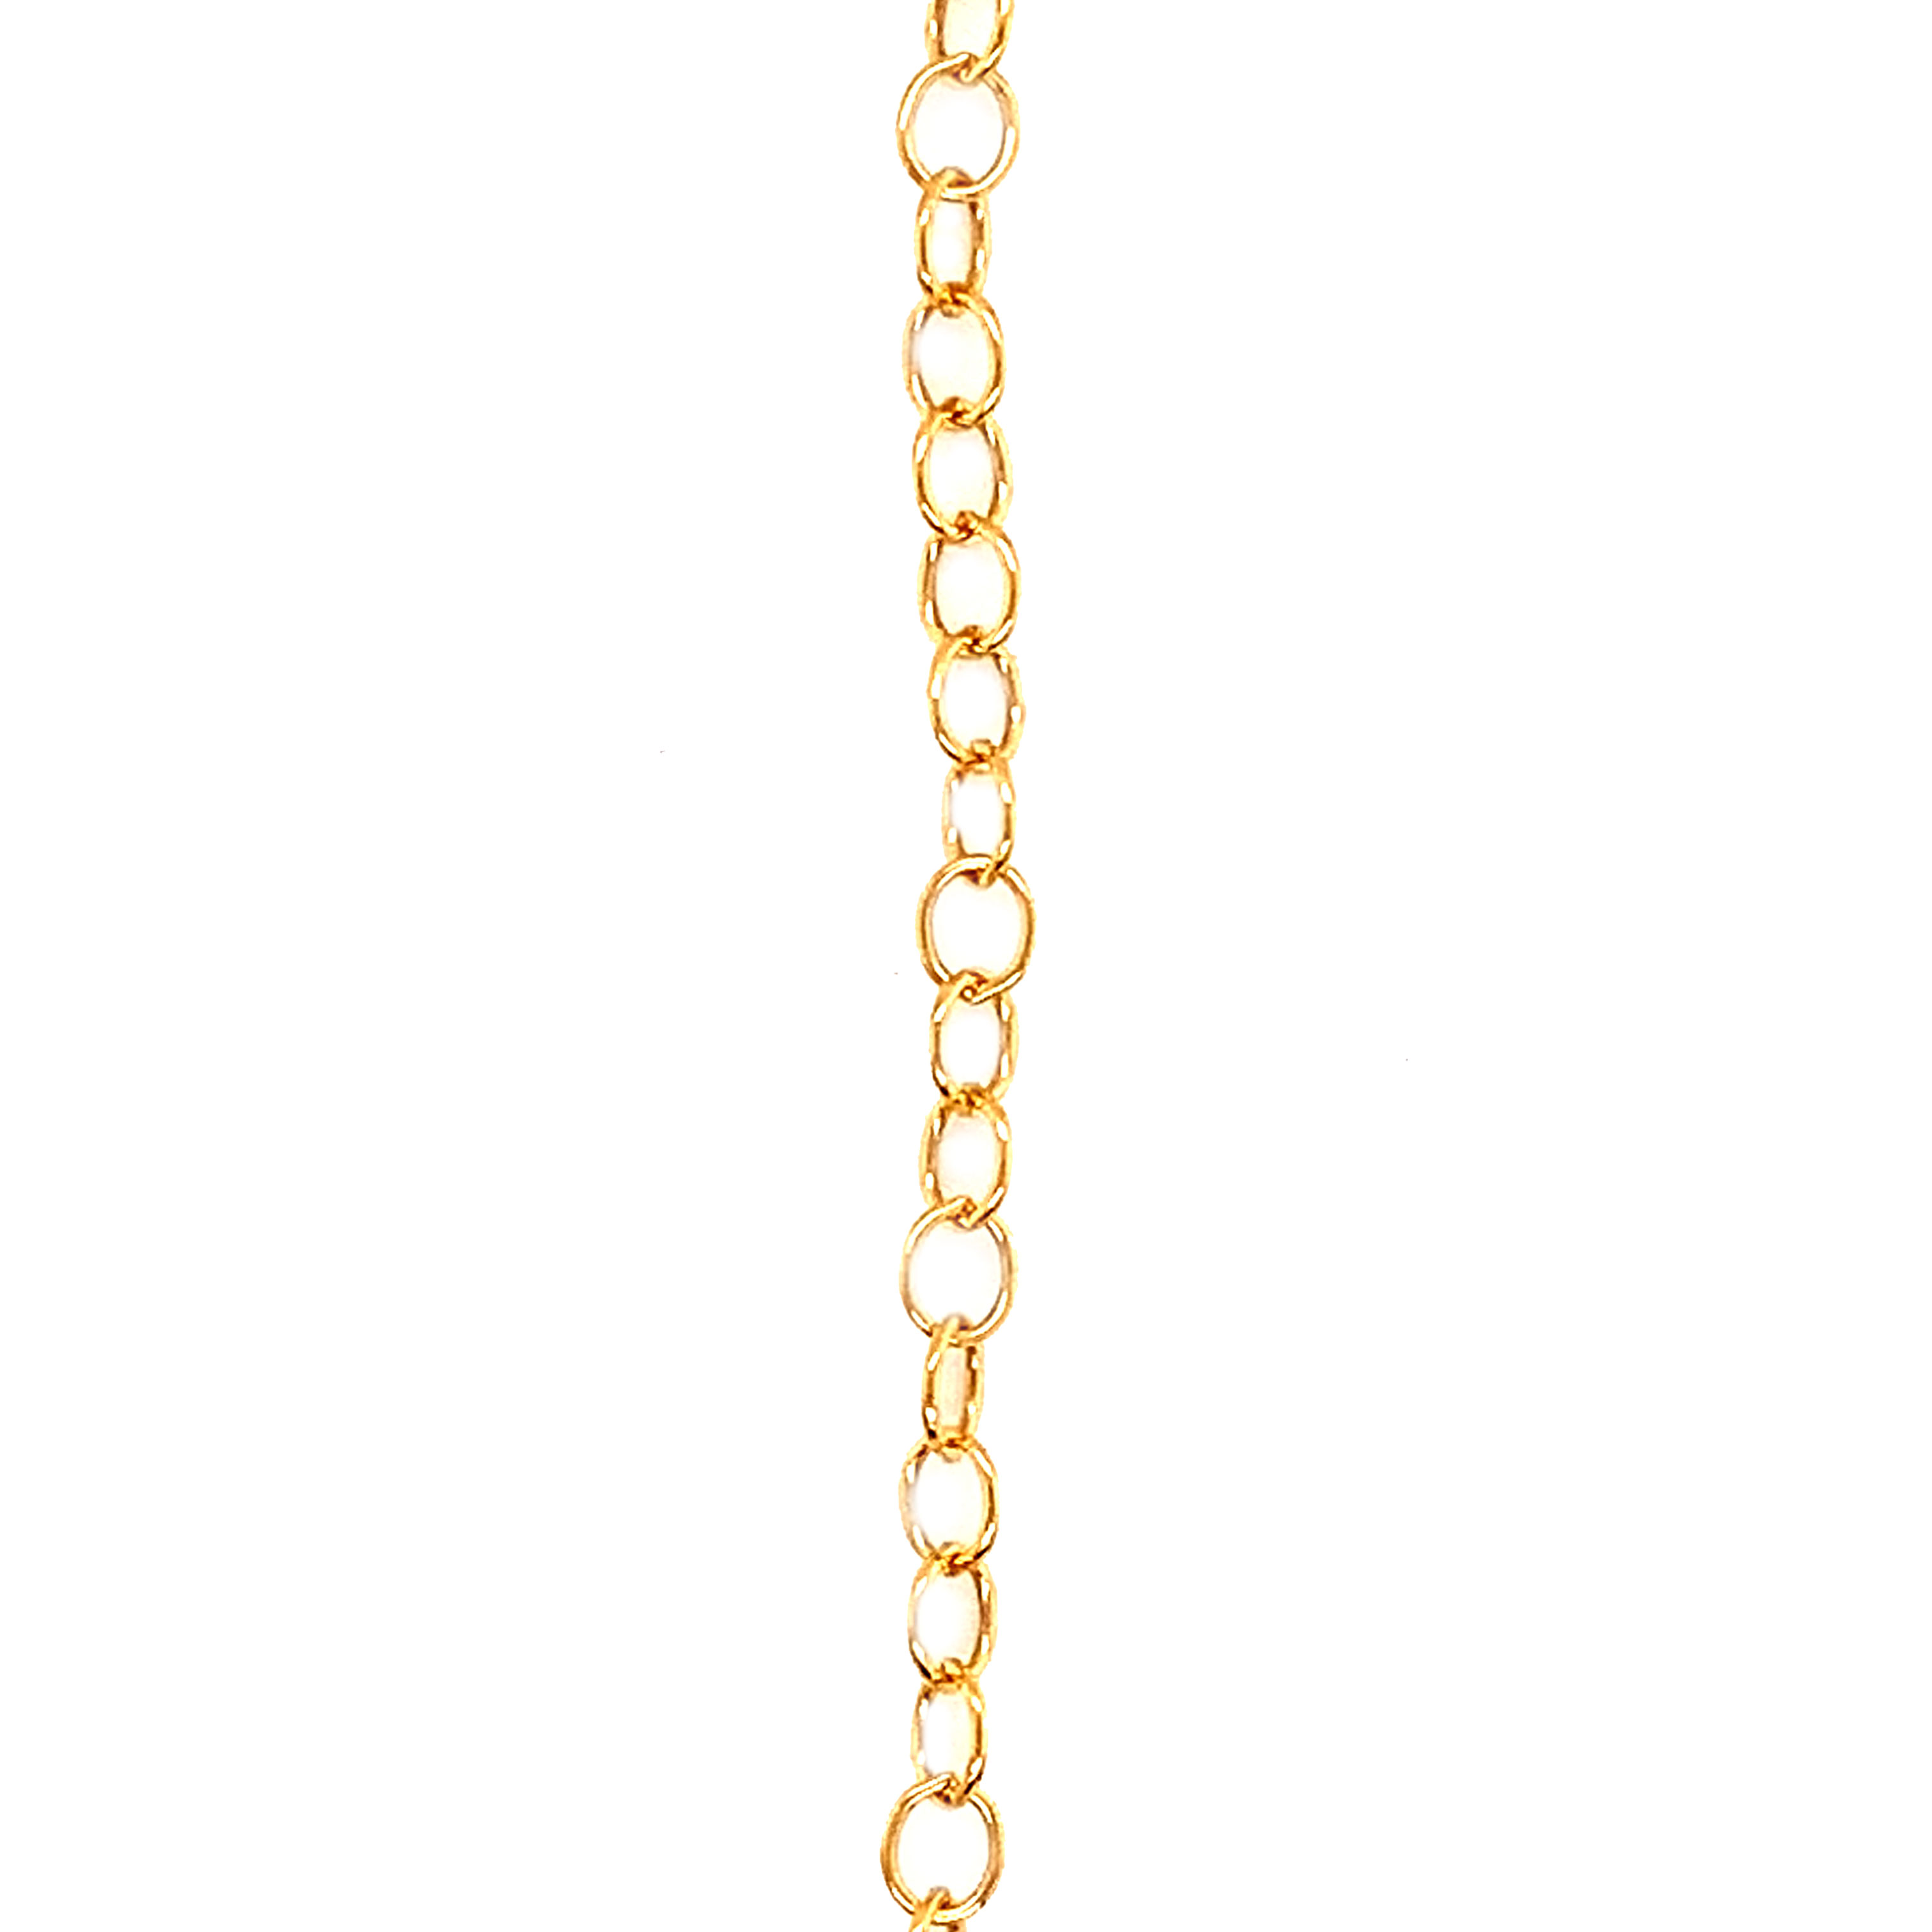 2.6mm Cable Extension Chain - Gold Filled - Price Per Foot